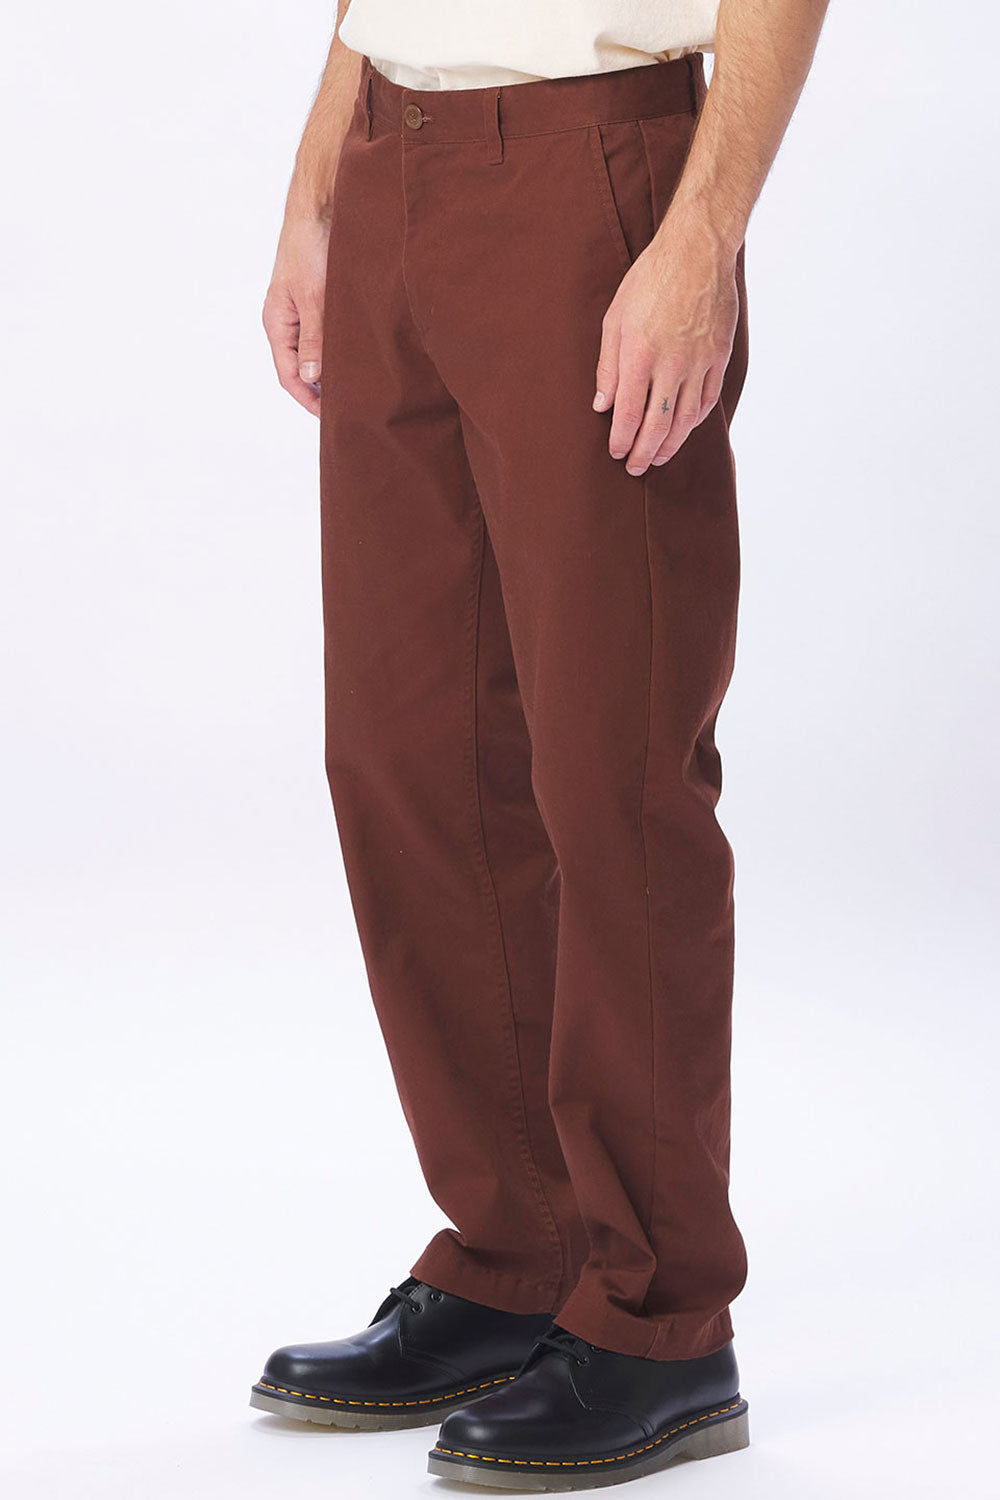 Obey - Straggler Pant - Sepia Brown - Side